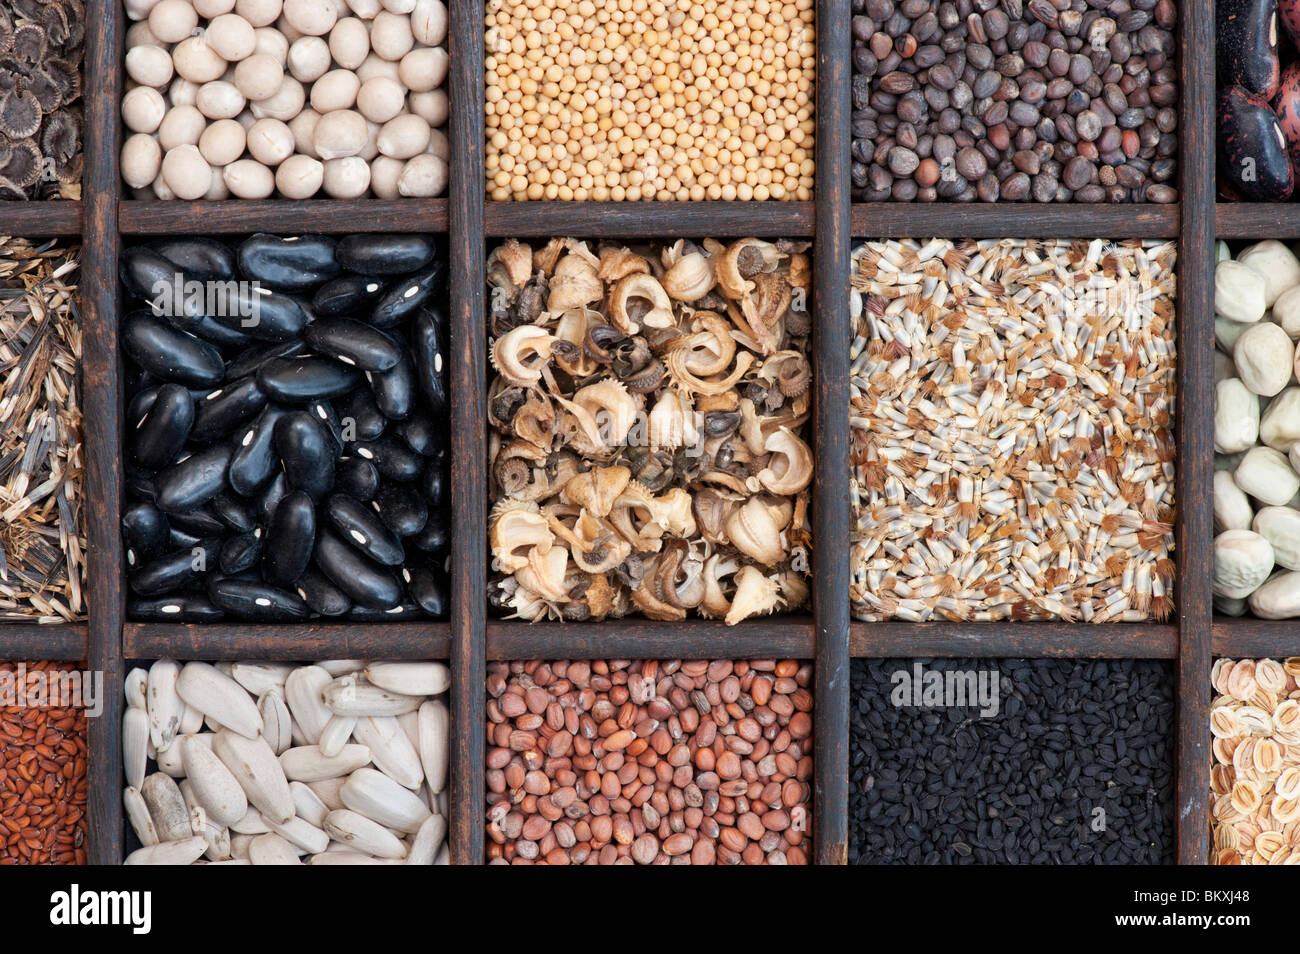 Selection of Vegetable and flower seeds in a wooden tray. Flat lay photography from above Stock Photo